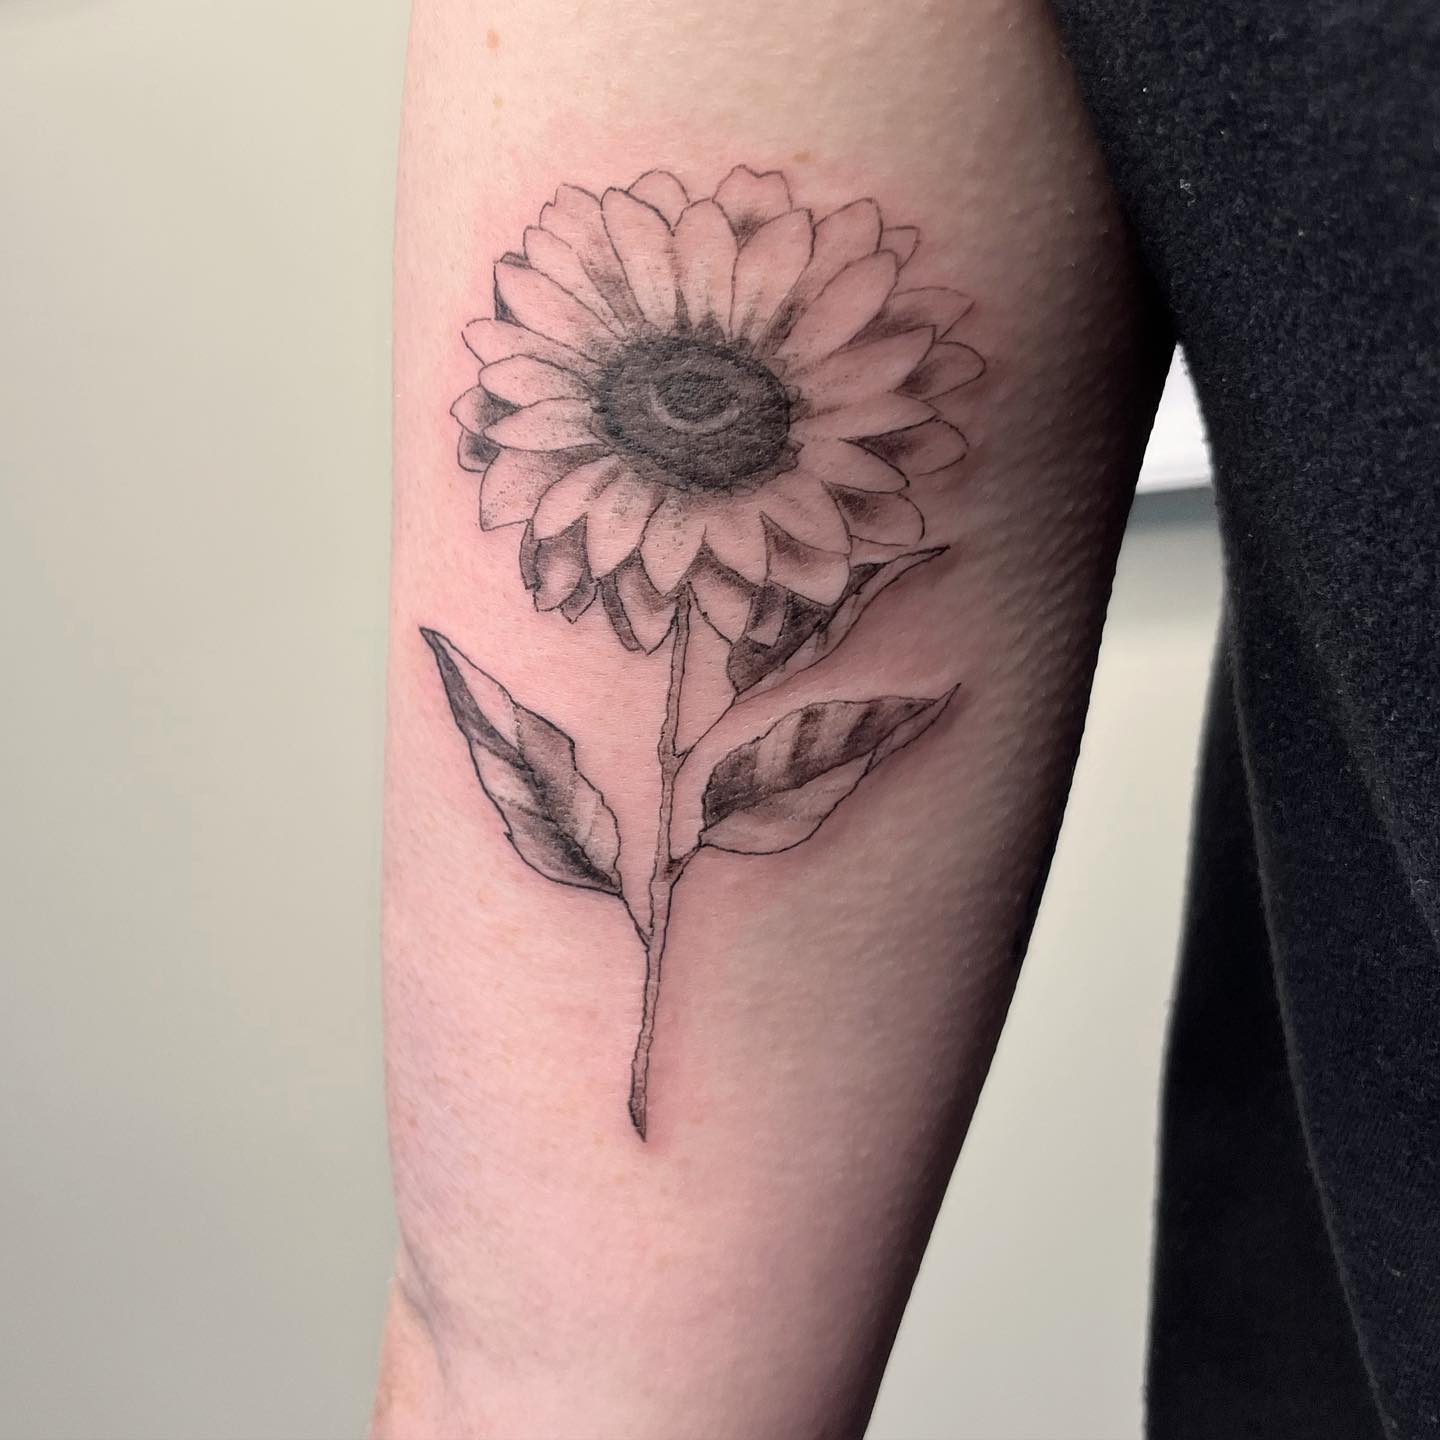 Sunflower with name by Santa Clause tattoo